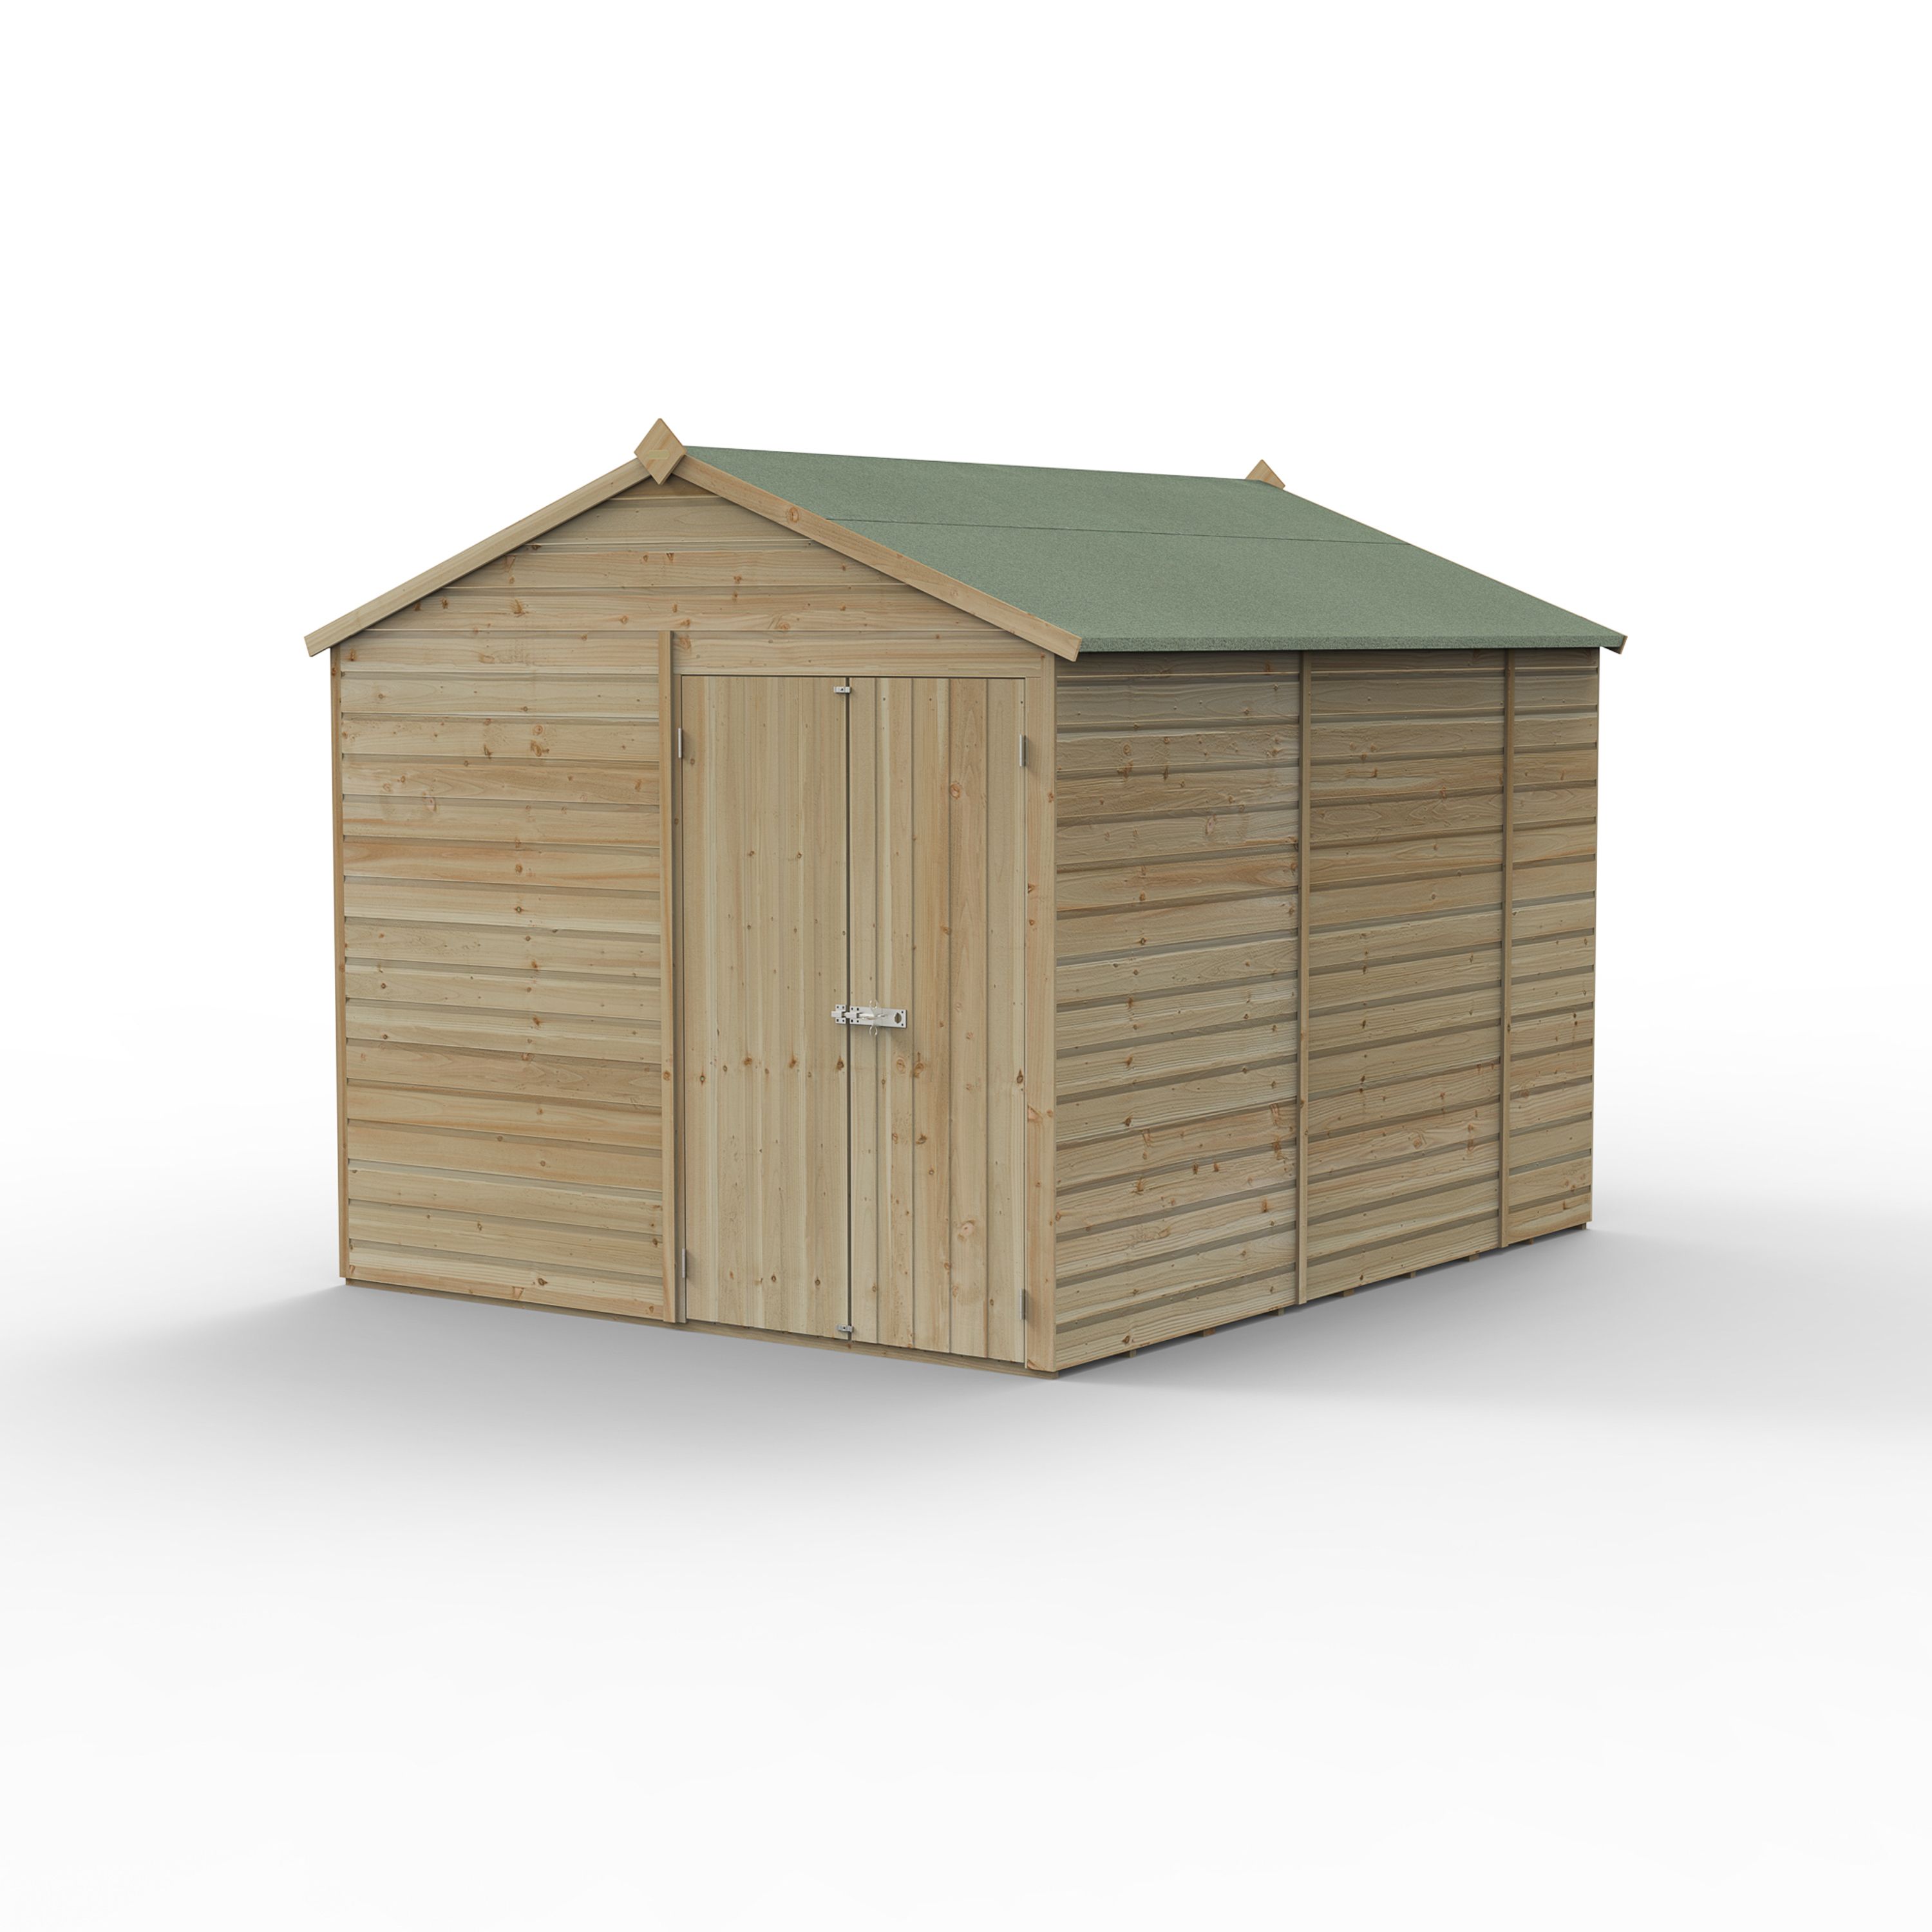 Forest Garden Beckwood 10x8 ft Apex Natural timber Wooden 2 door Shed with floor (Base included)